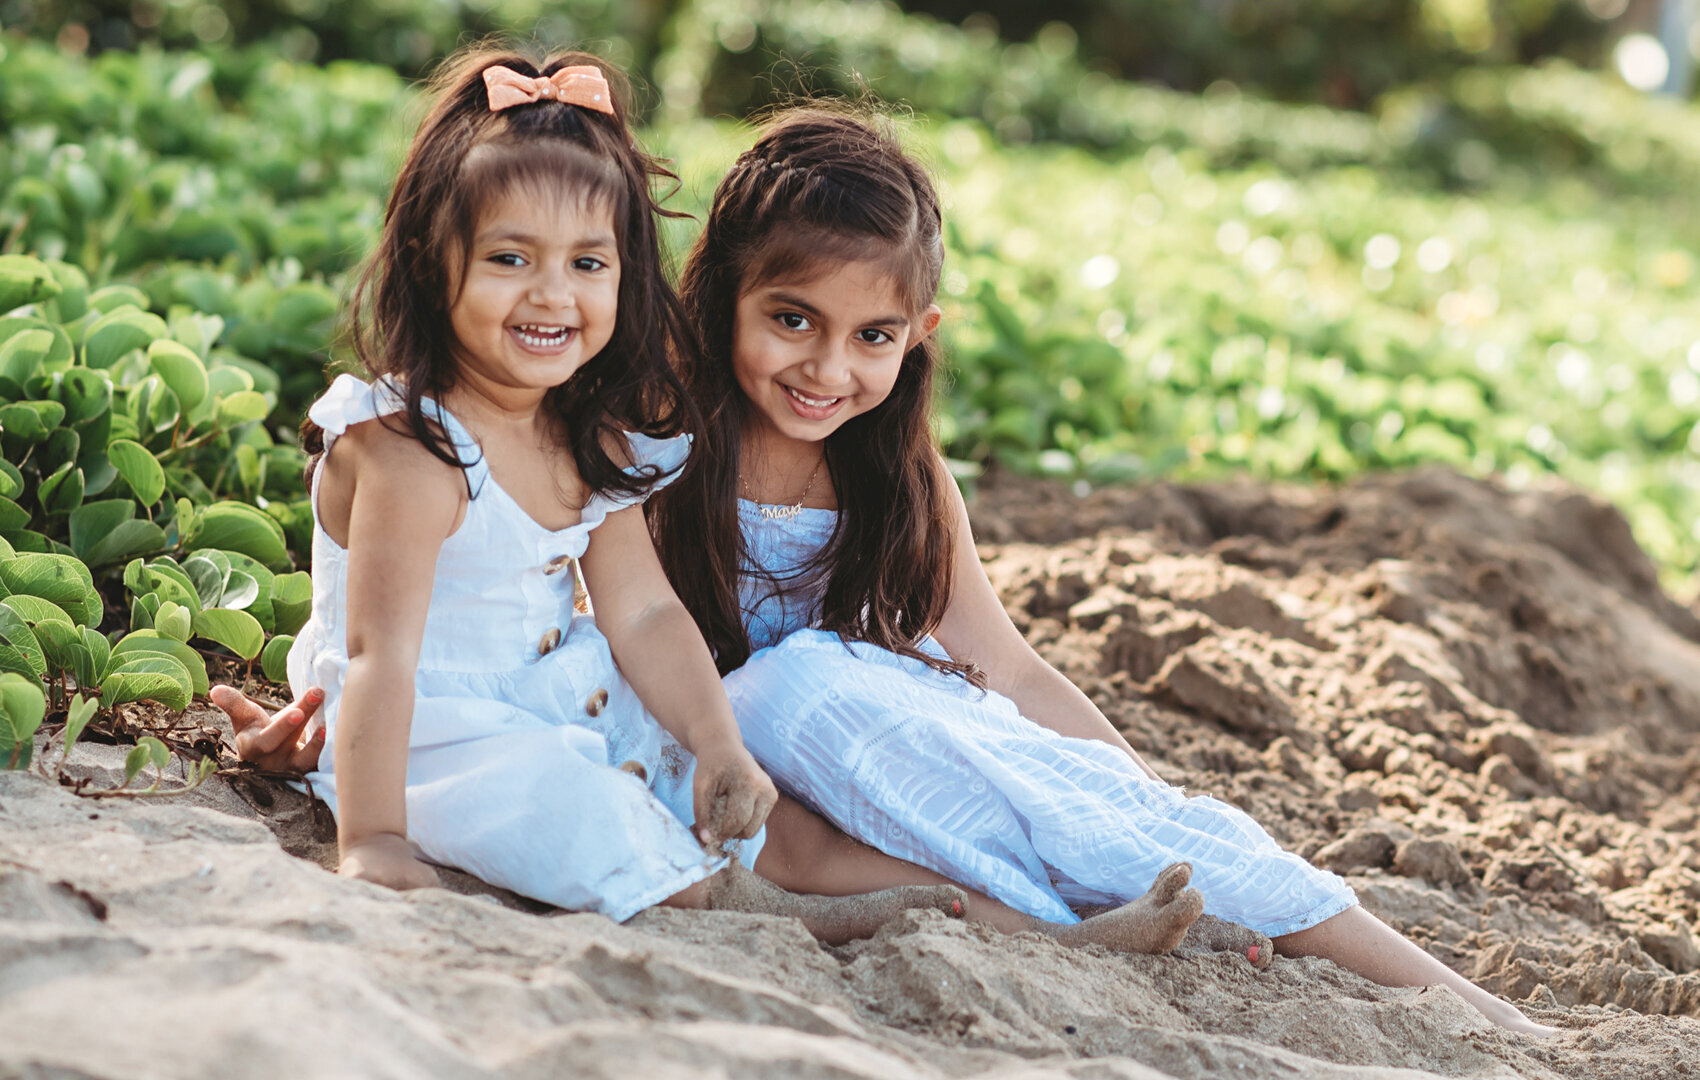 Sisters form India meet for the first time in Kauai.  Cute photo they will always remember.